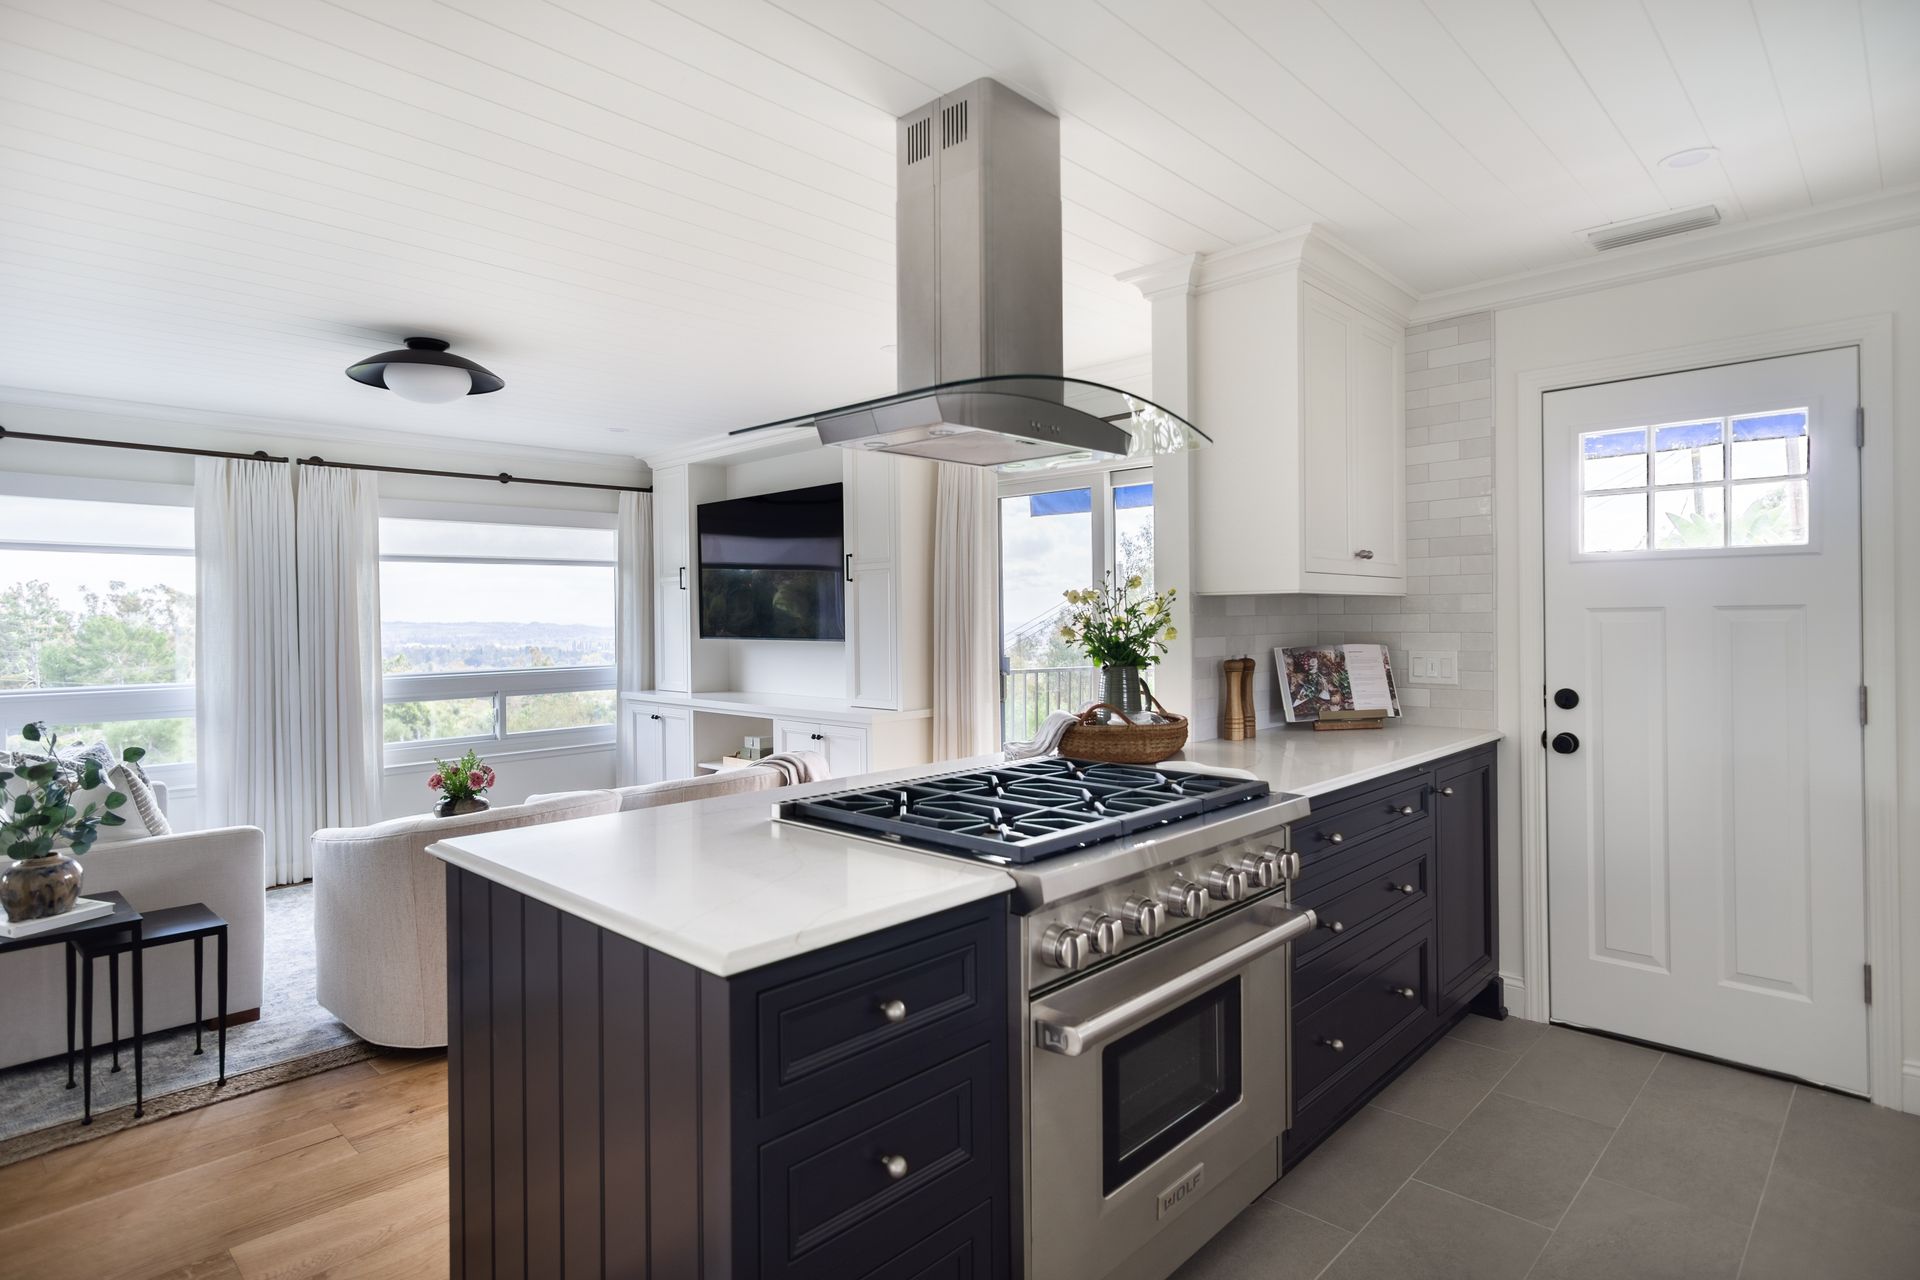 A kitchen with stainless steel appliances and a large island.